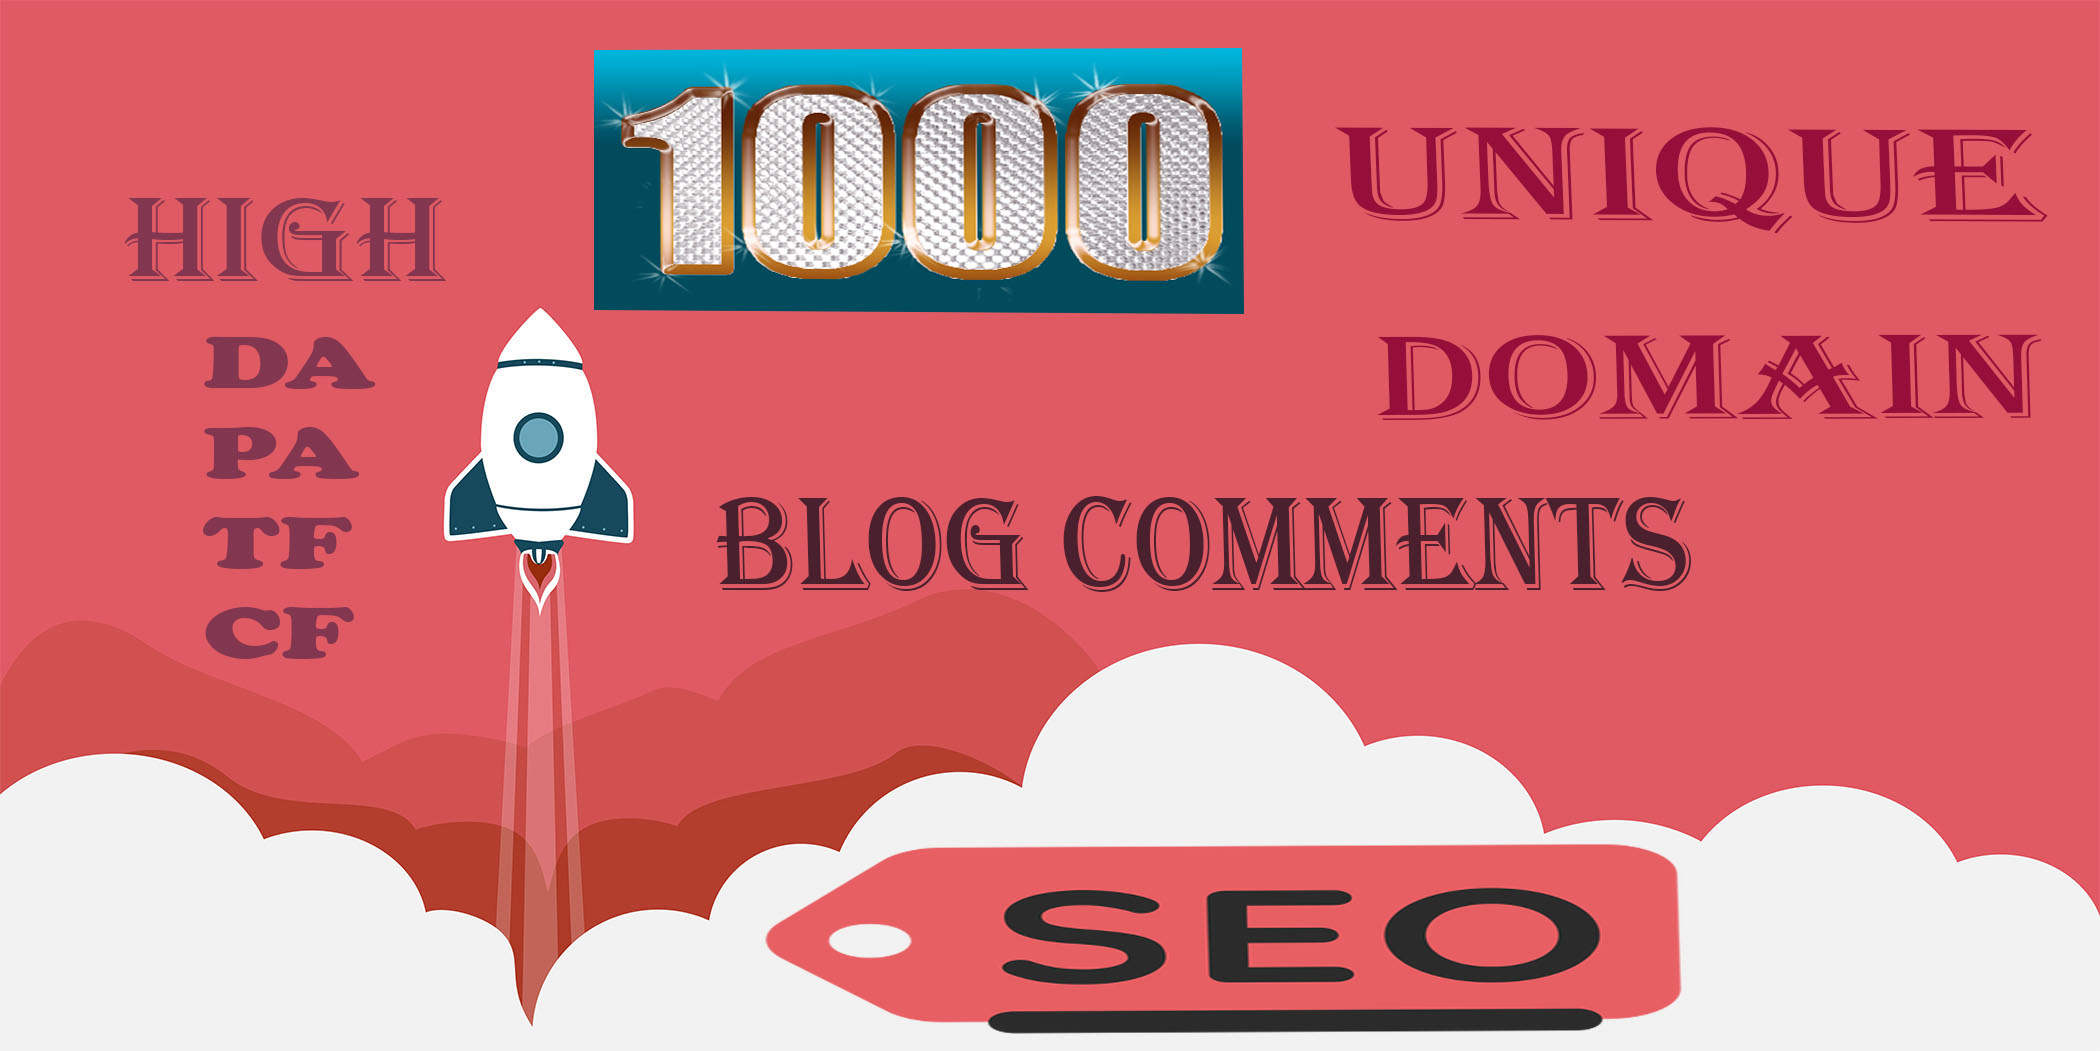 I will skyrocket your website with 1000 Unique Domain Blog Comments on High DA/PA/TF/CF Sites